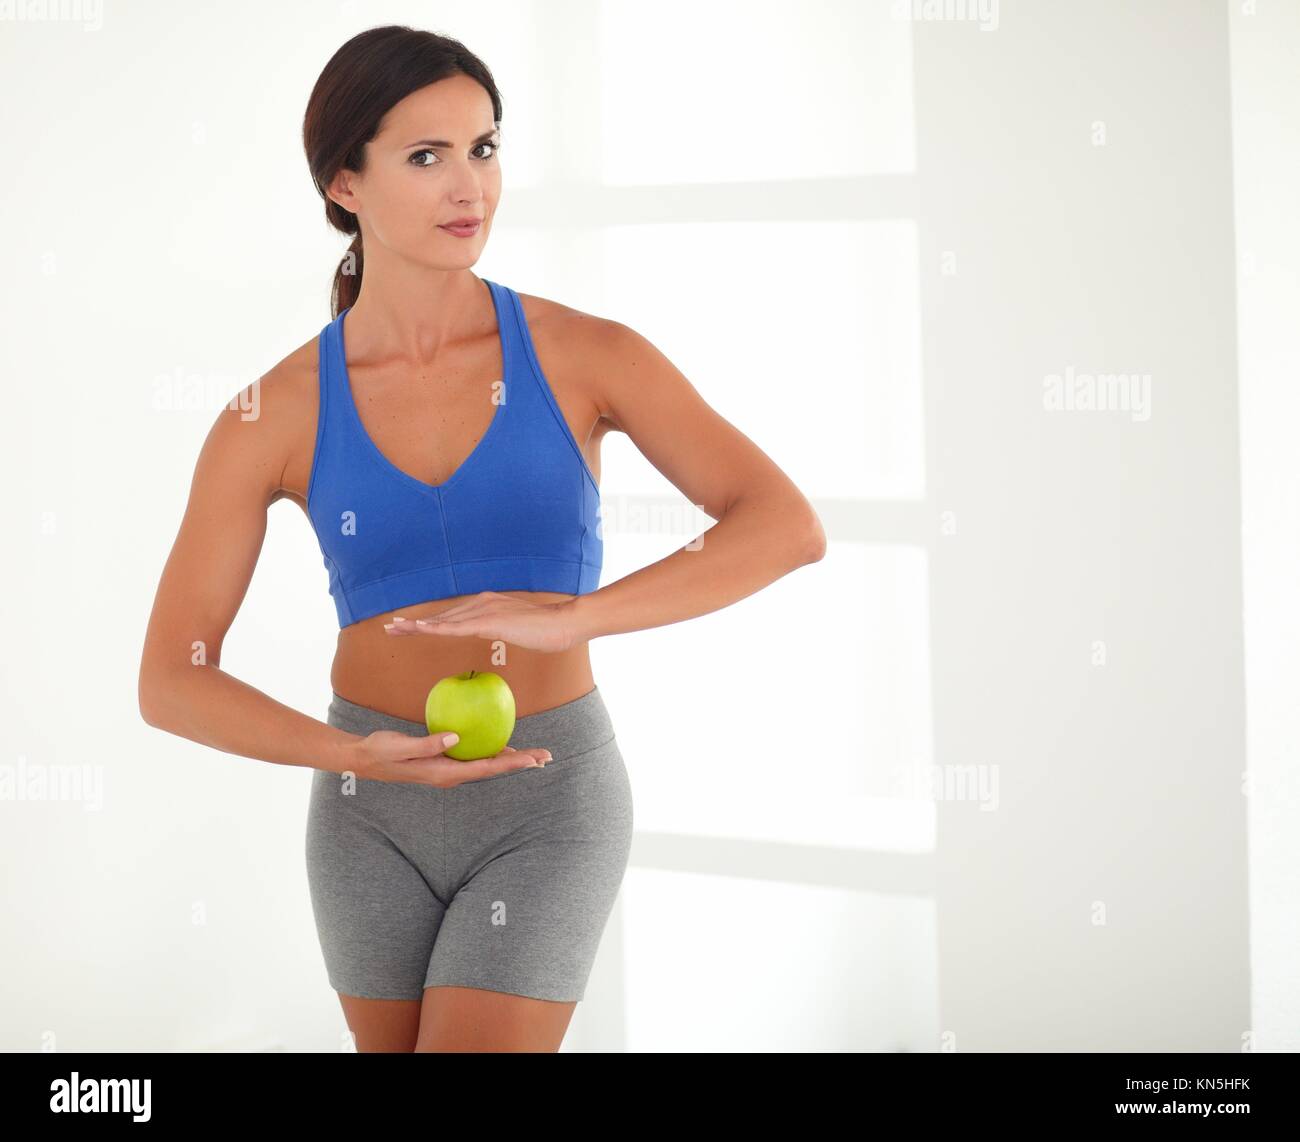 Hispanic woman in sports clothing holding apple while looking at you. Stock Photo